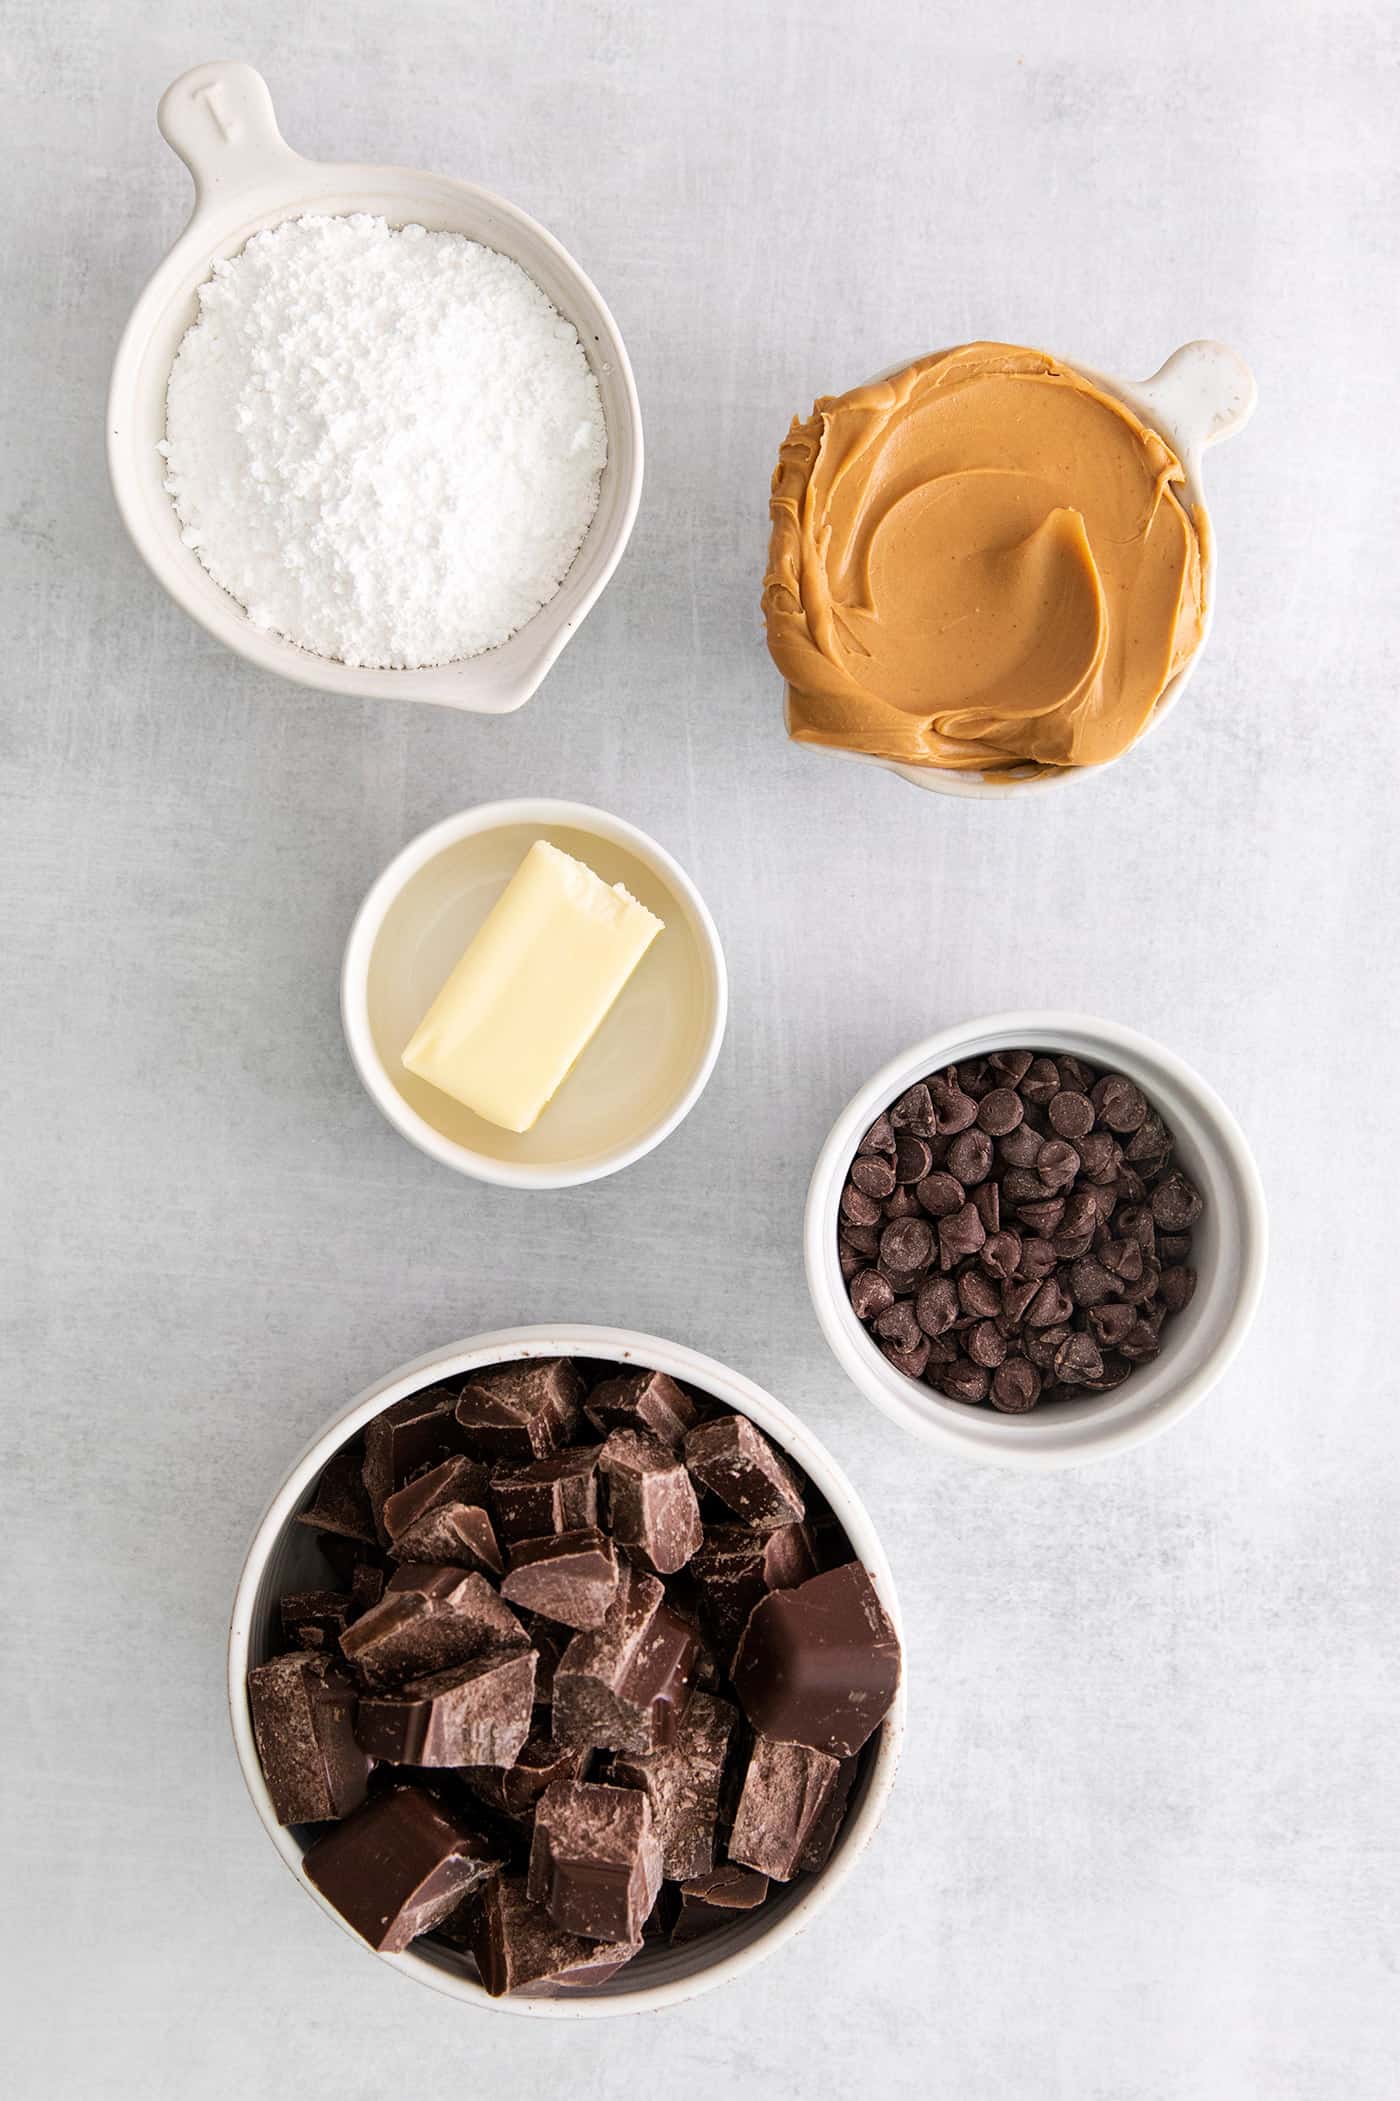 Overhead view of homemade peanut butter cups ingredients